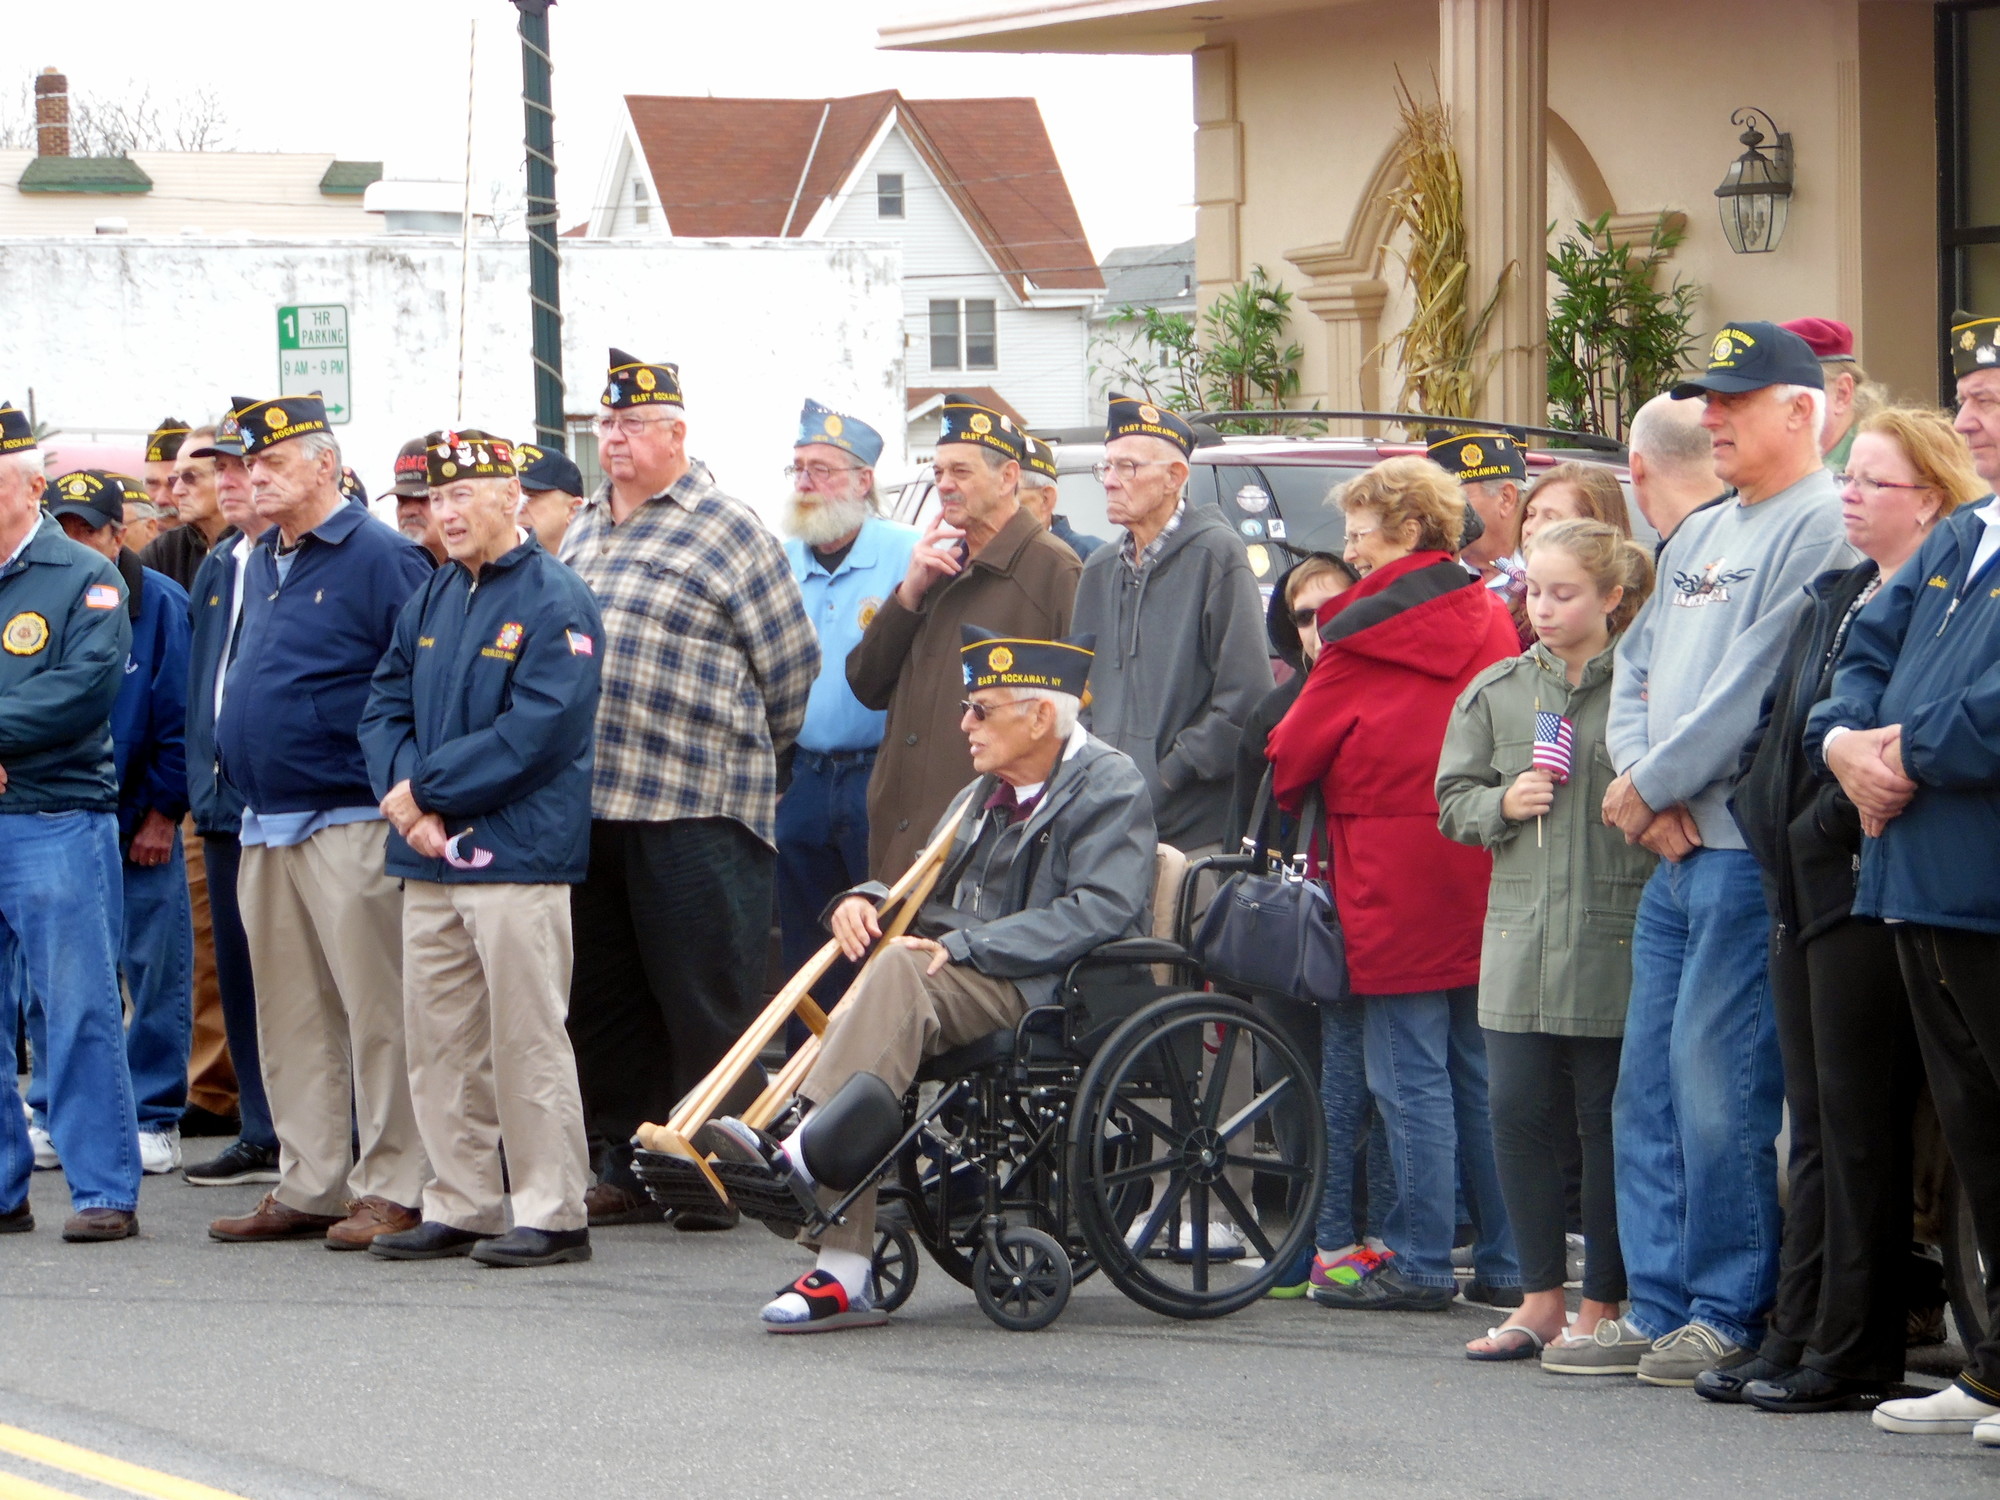 Veterans and residents lined the street to pay tribute at the ceremony.